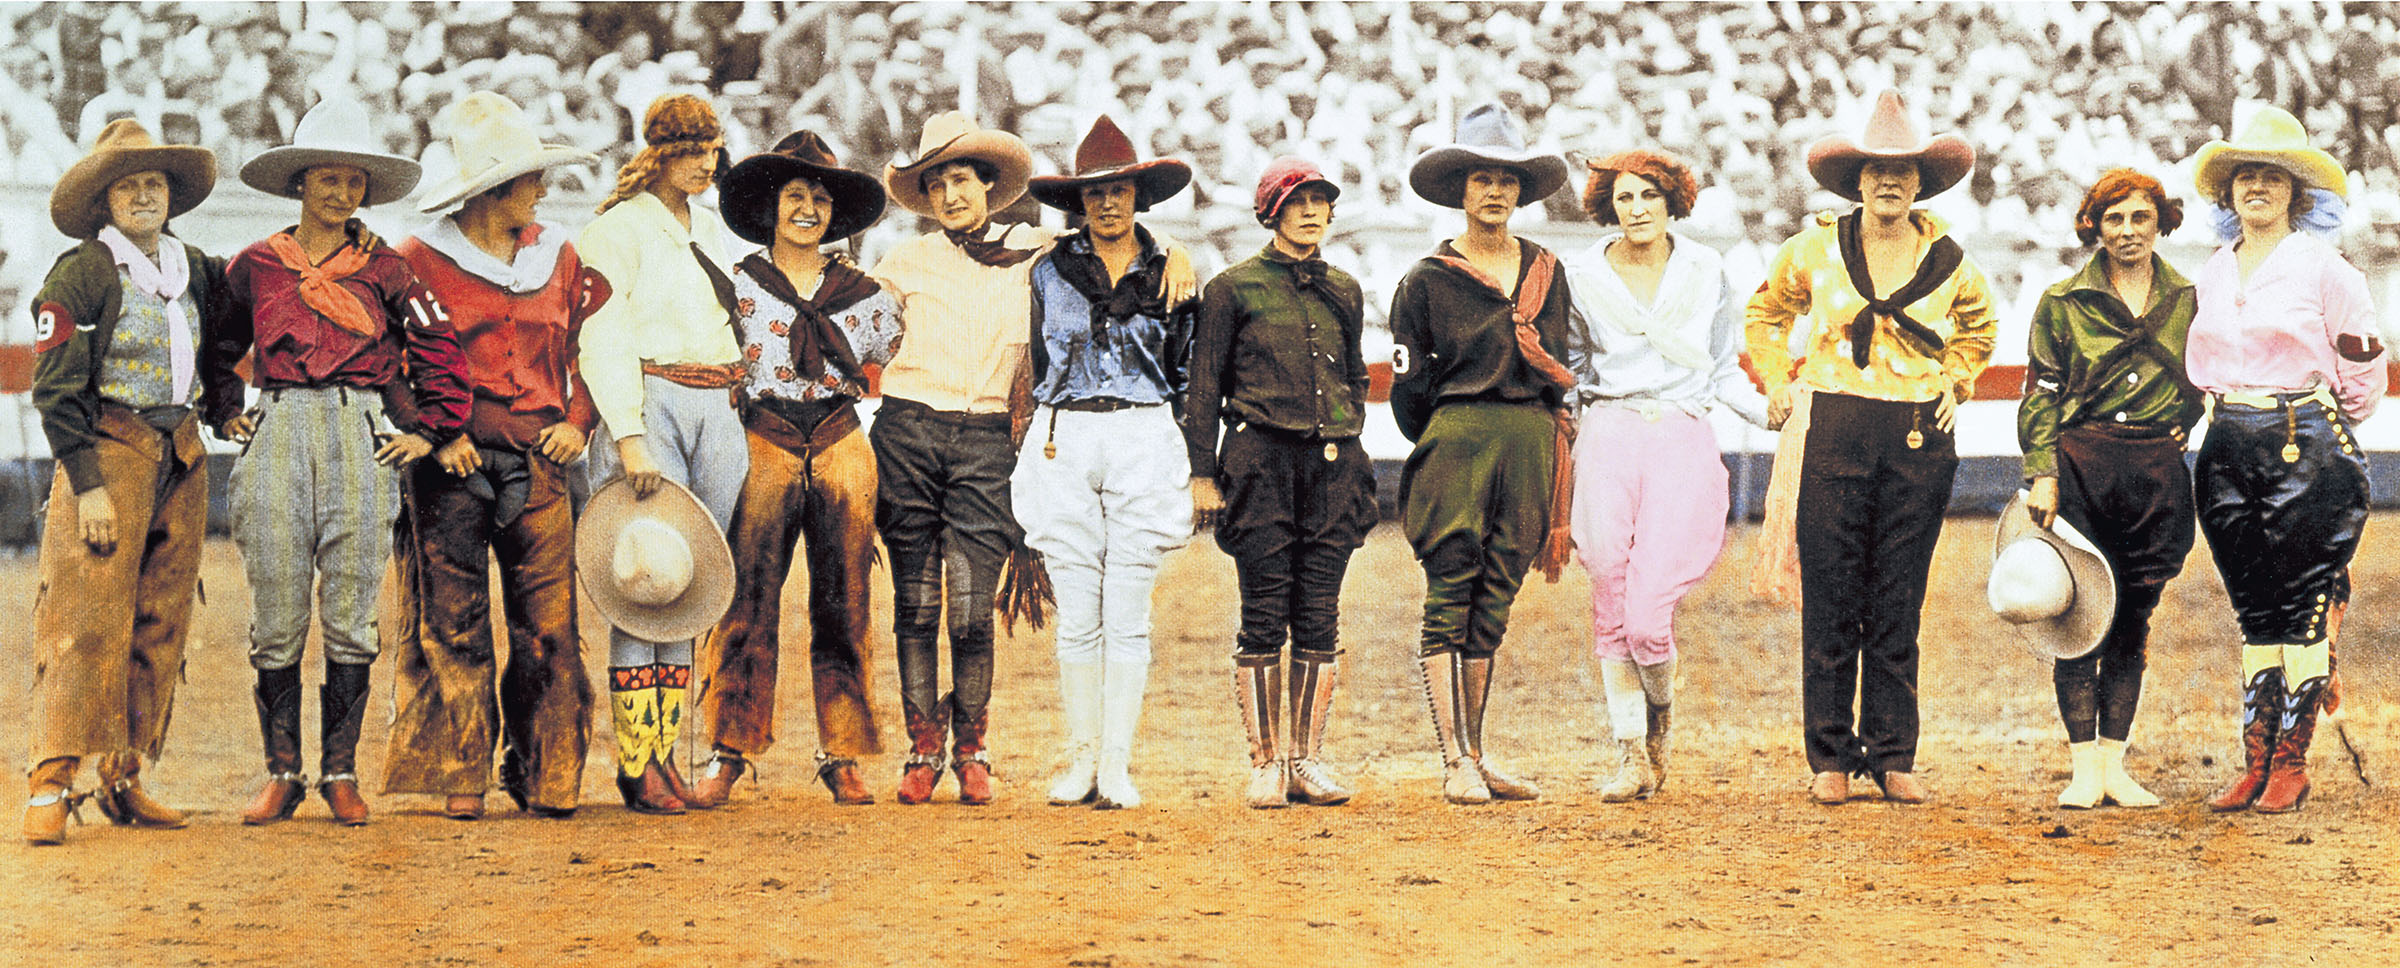 A group of people standing at a rodeo in unique cowboy boots